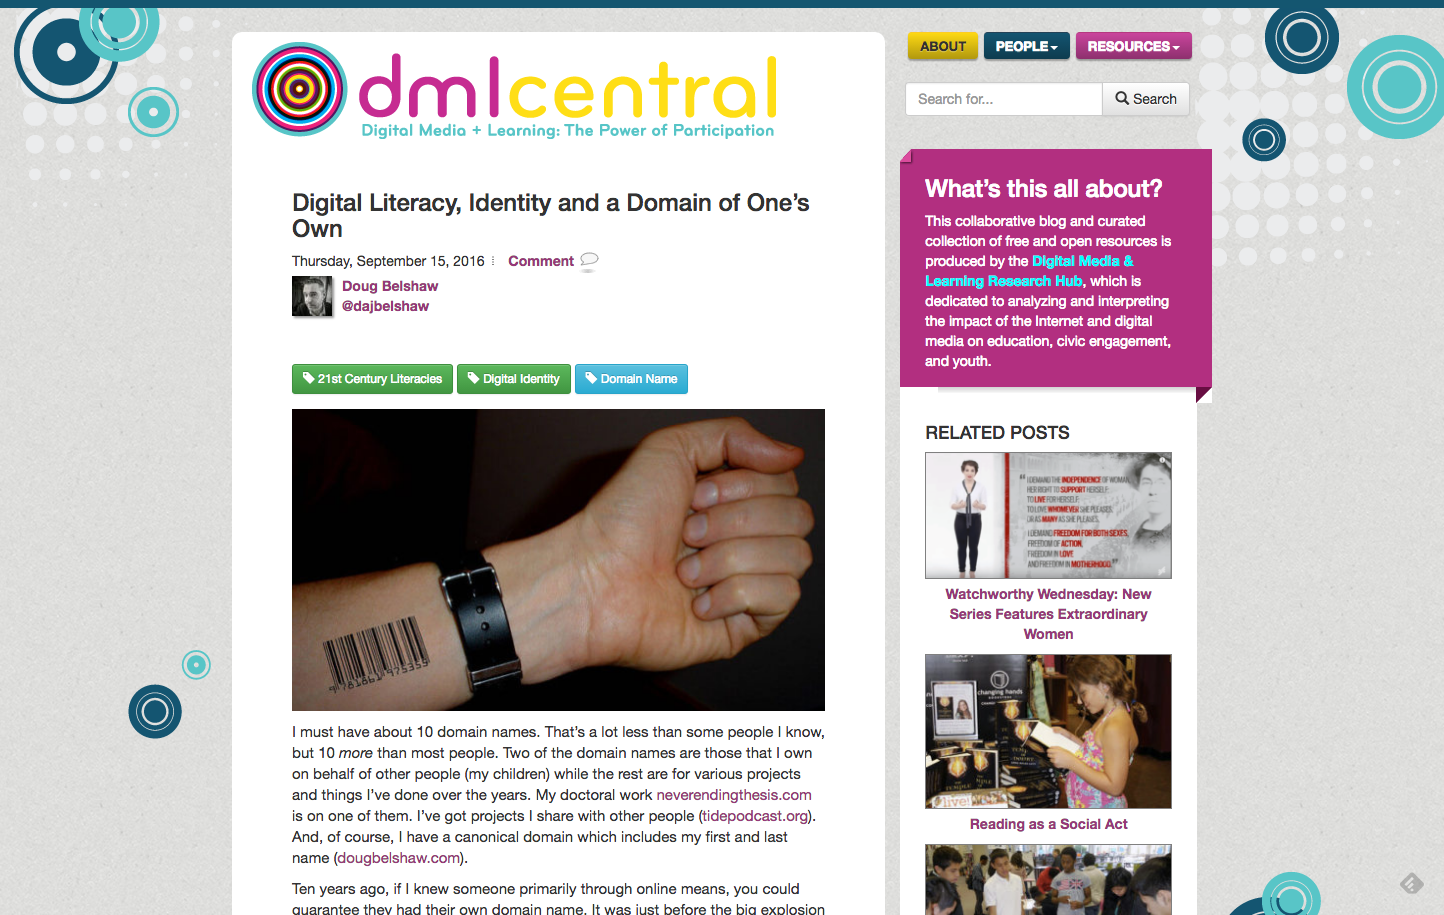 Digital Literacy, Identity and a Domain of One’s Own [DML Central]